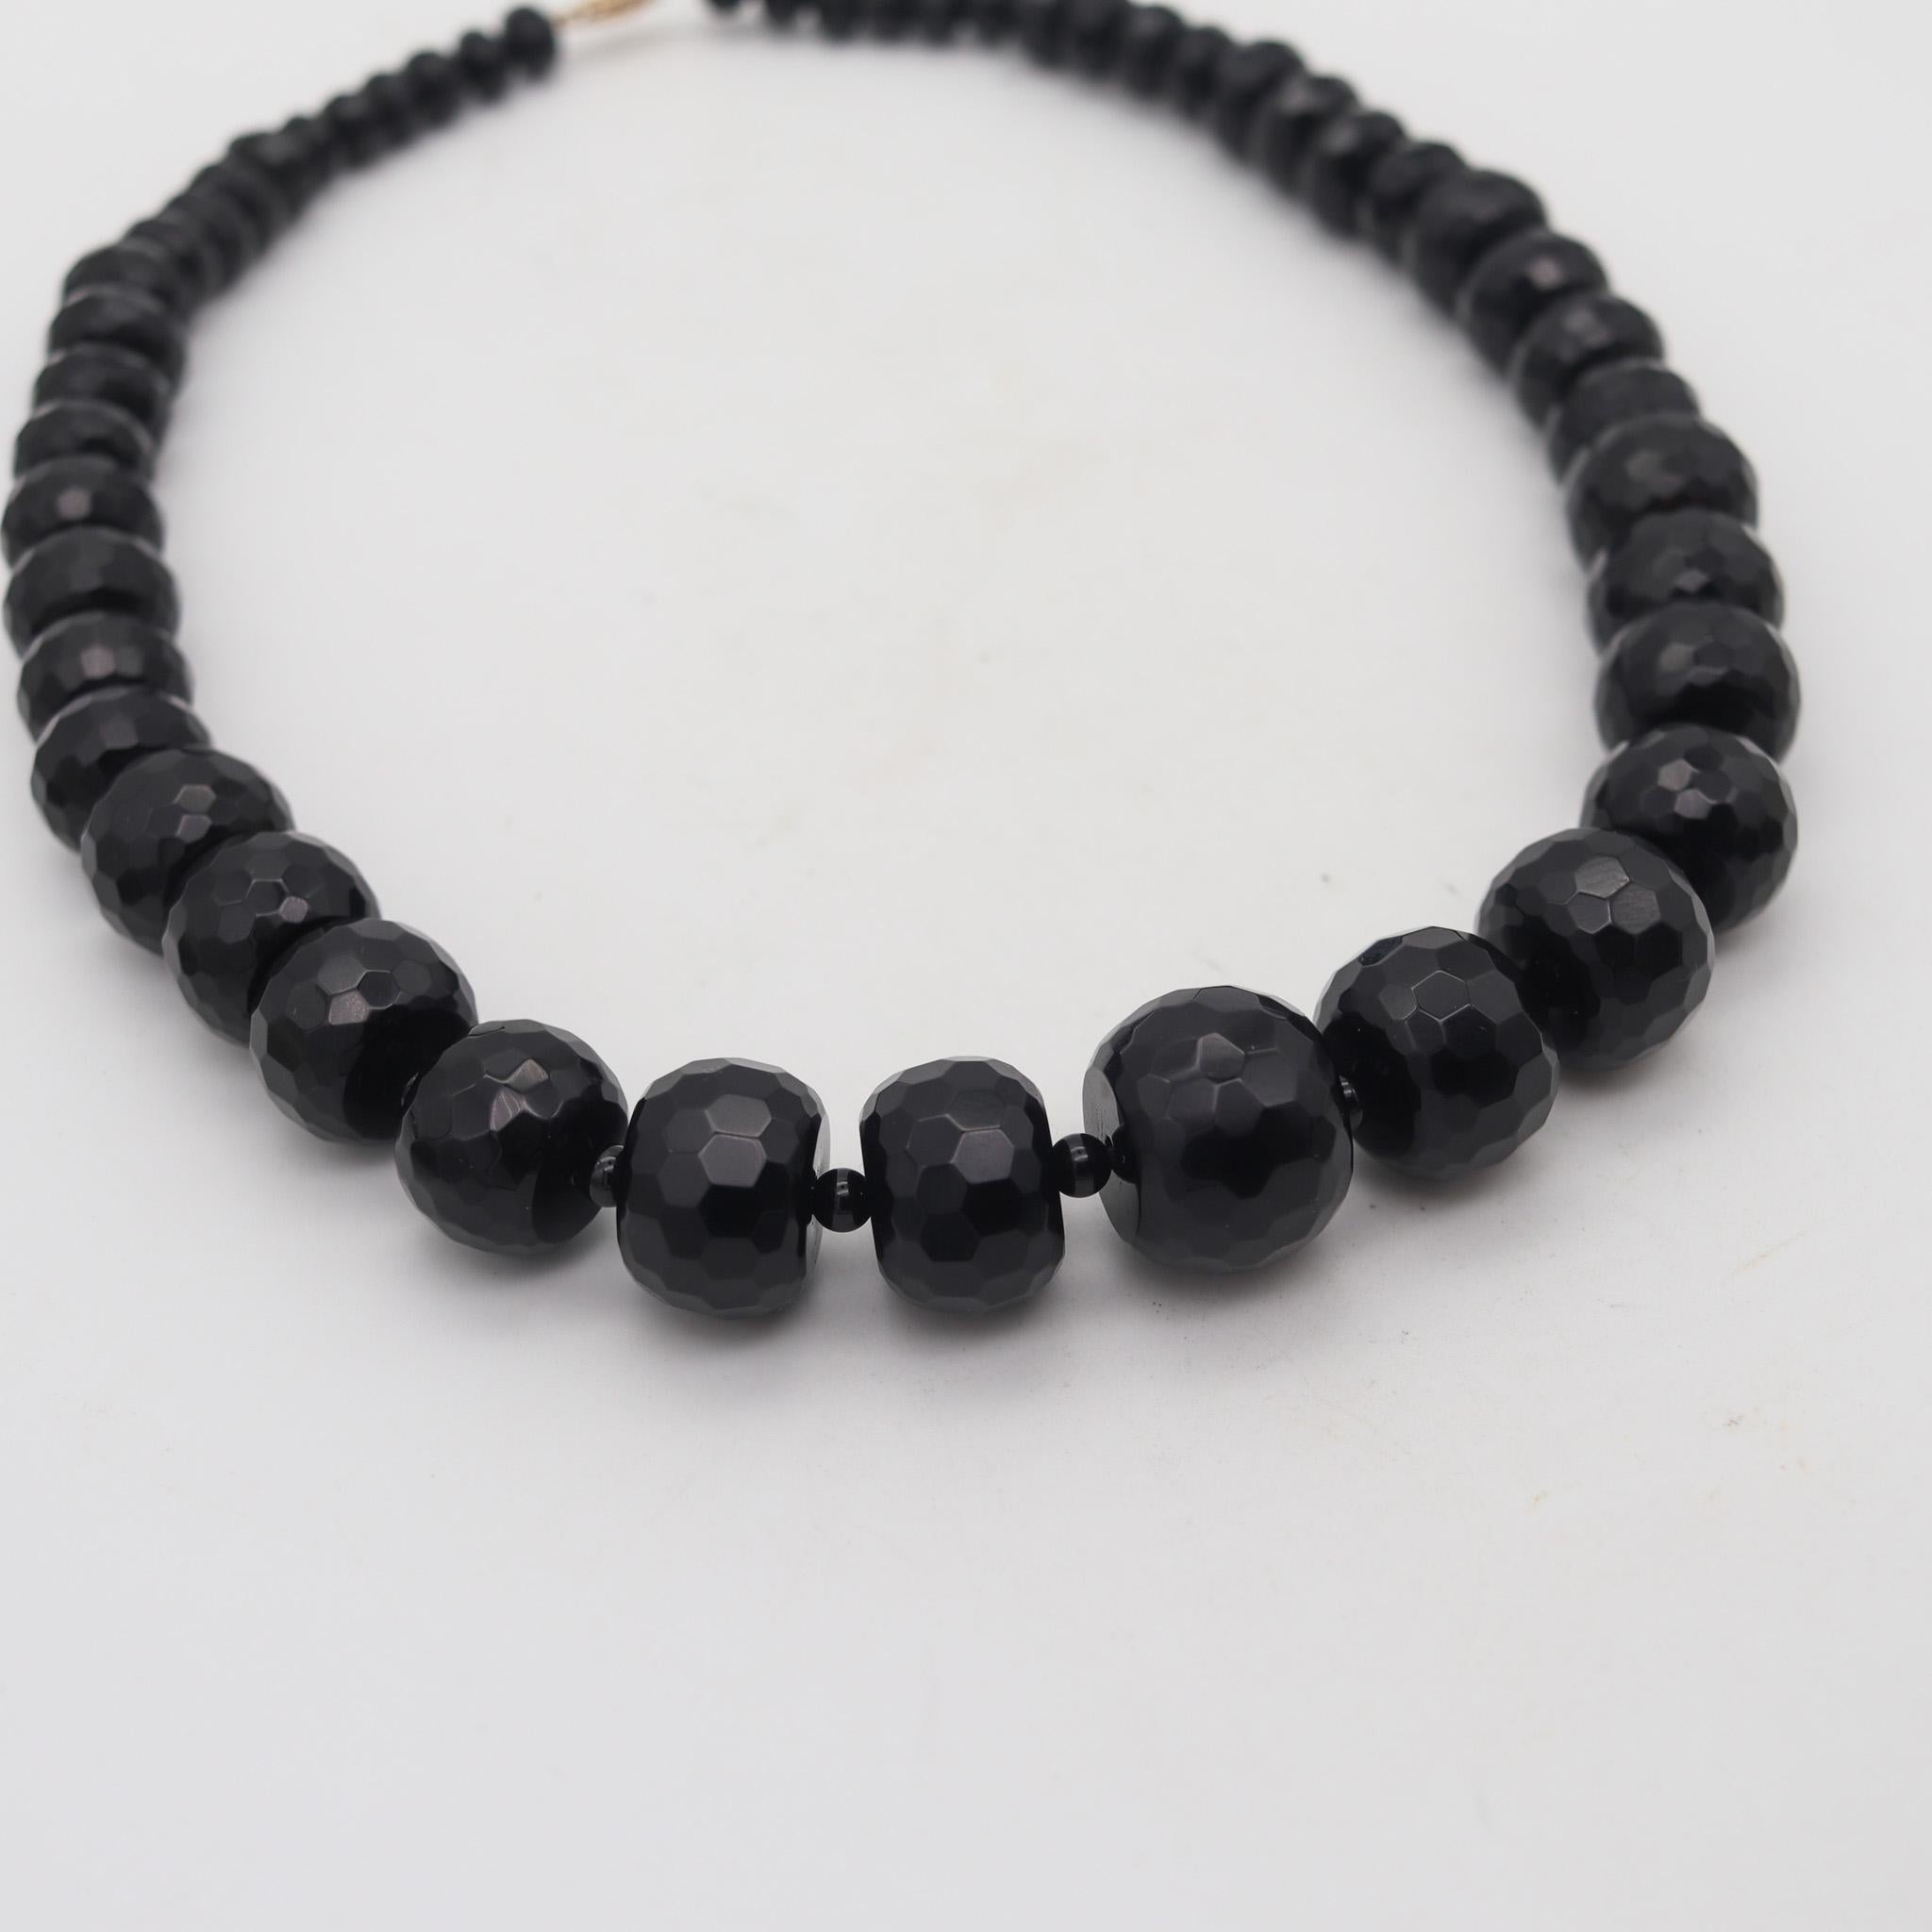 Modernist 1970 Necklace With Graduated Faceted Beads Of Onyx In 14Kt Yellow Gold In Excellent Condition For Sale In Miami, FL